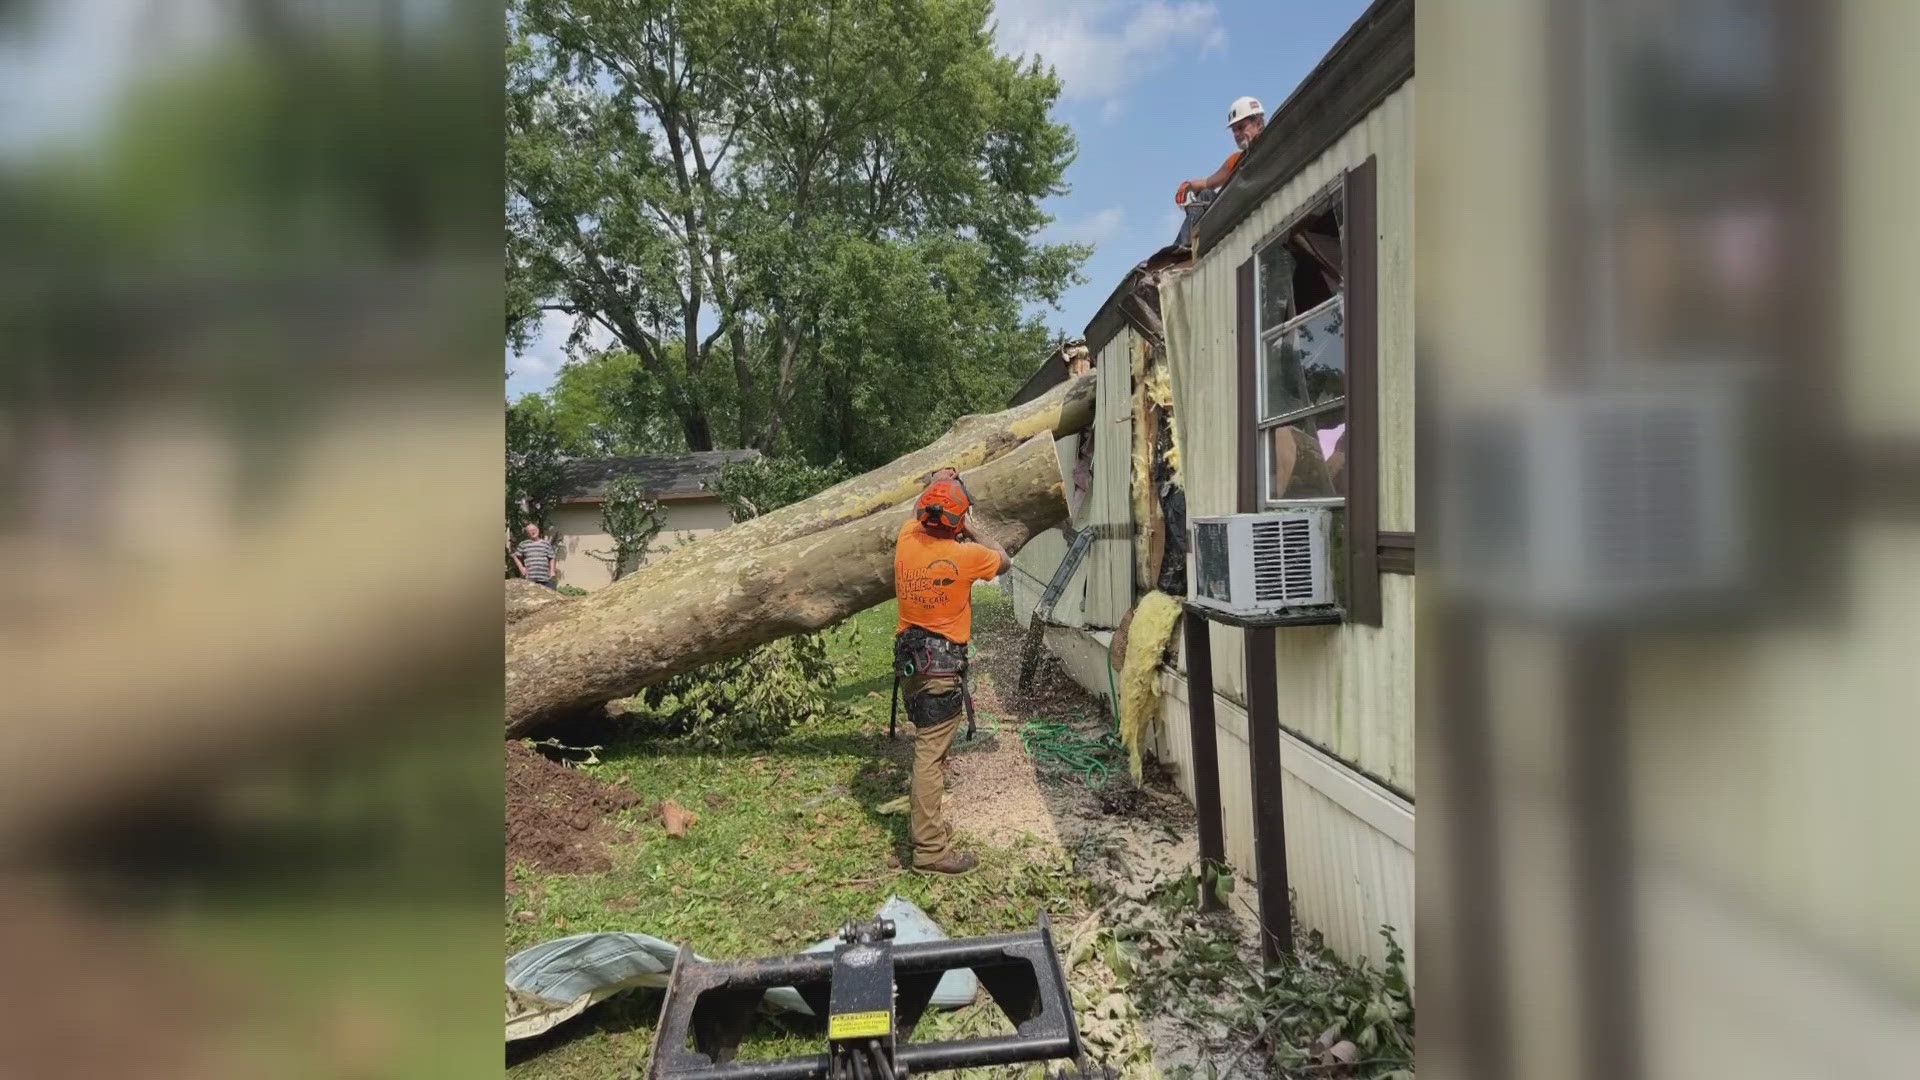 David Wentz says the storm damaged the foundation to his home, and uprooted a tree that collapsed on his next door neighbor’s mobile home, making it uninhabitable.